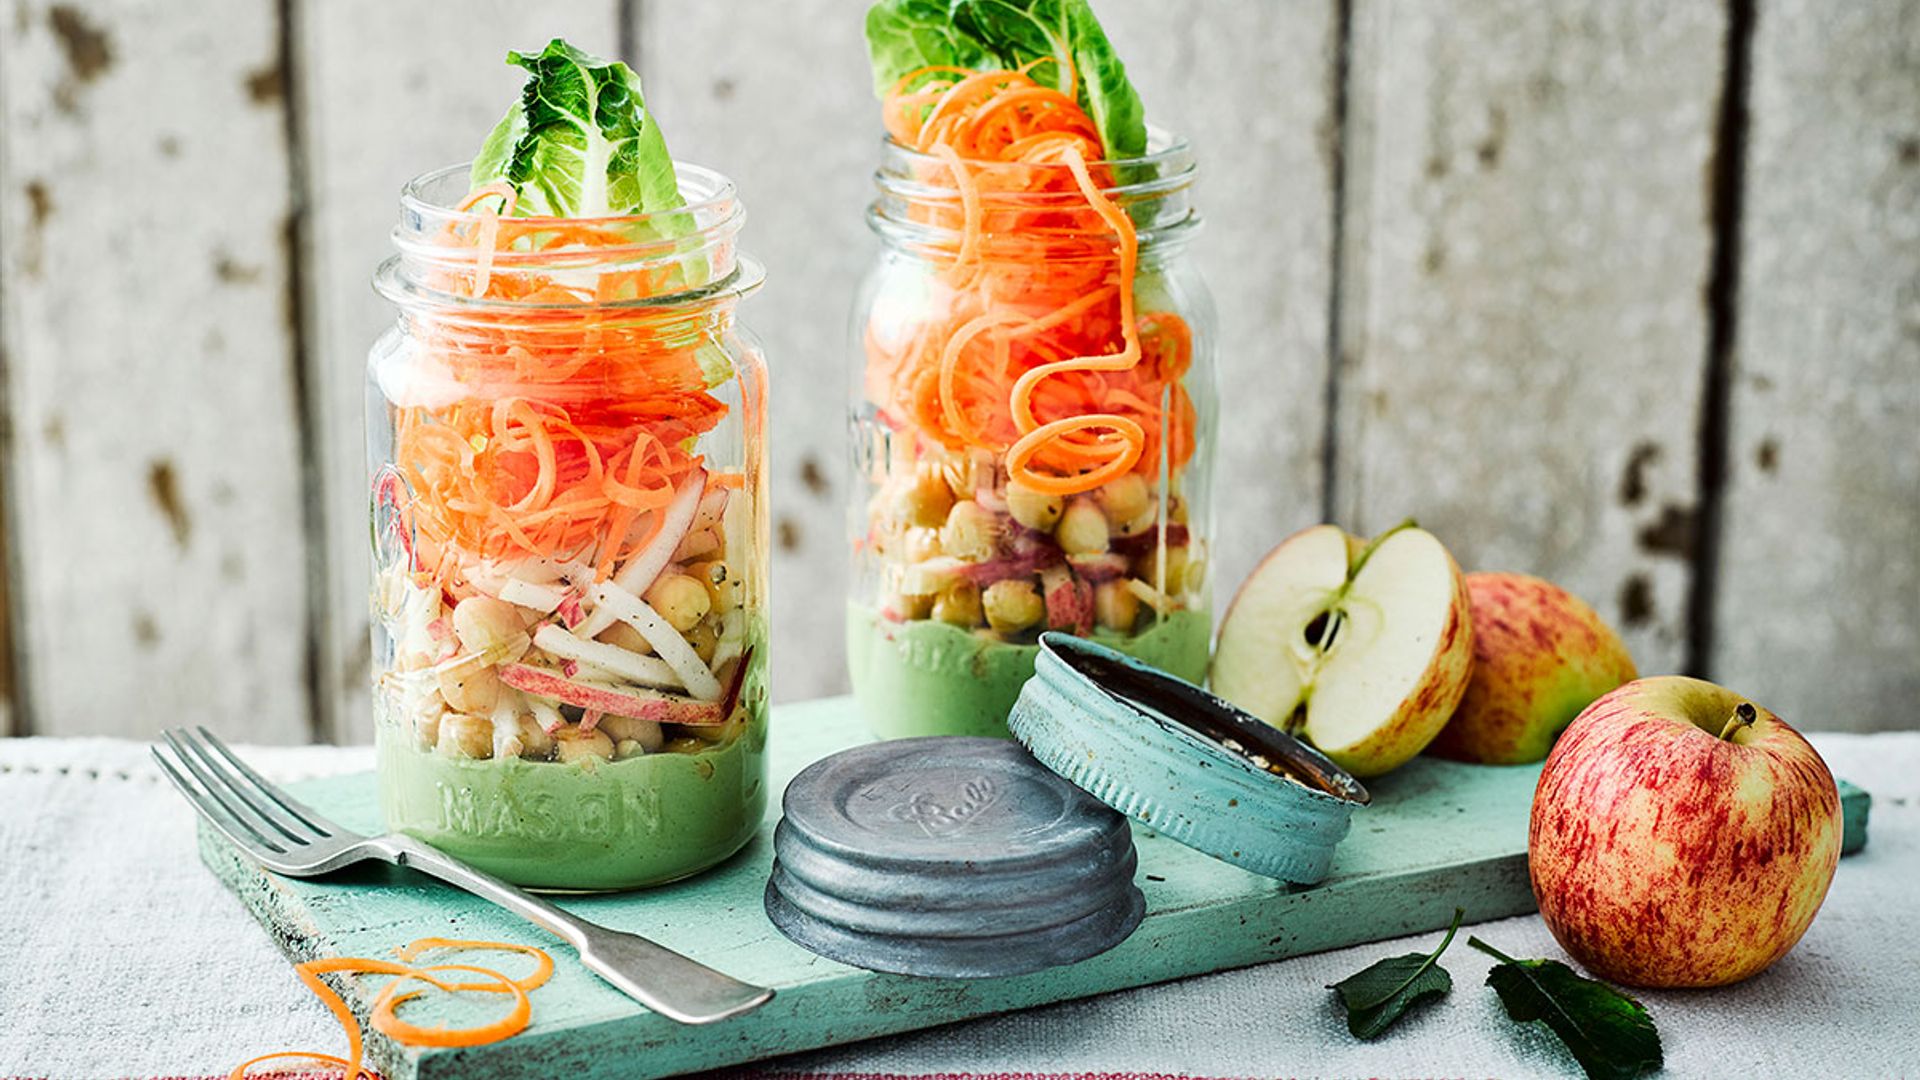 You need to try this Vegan salad jar recipe - the latest plant-based craze